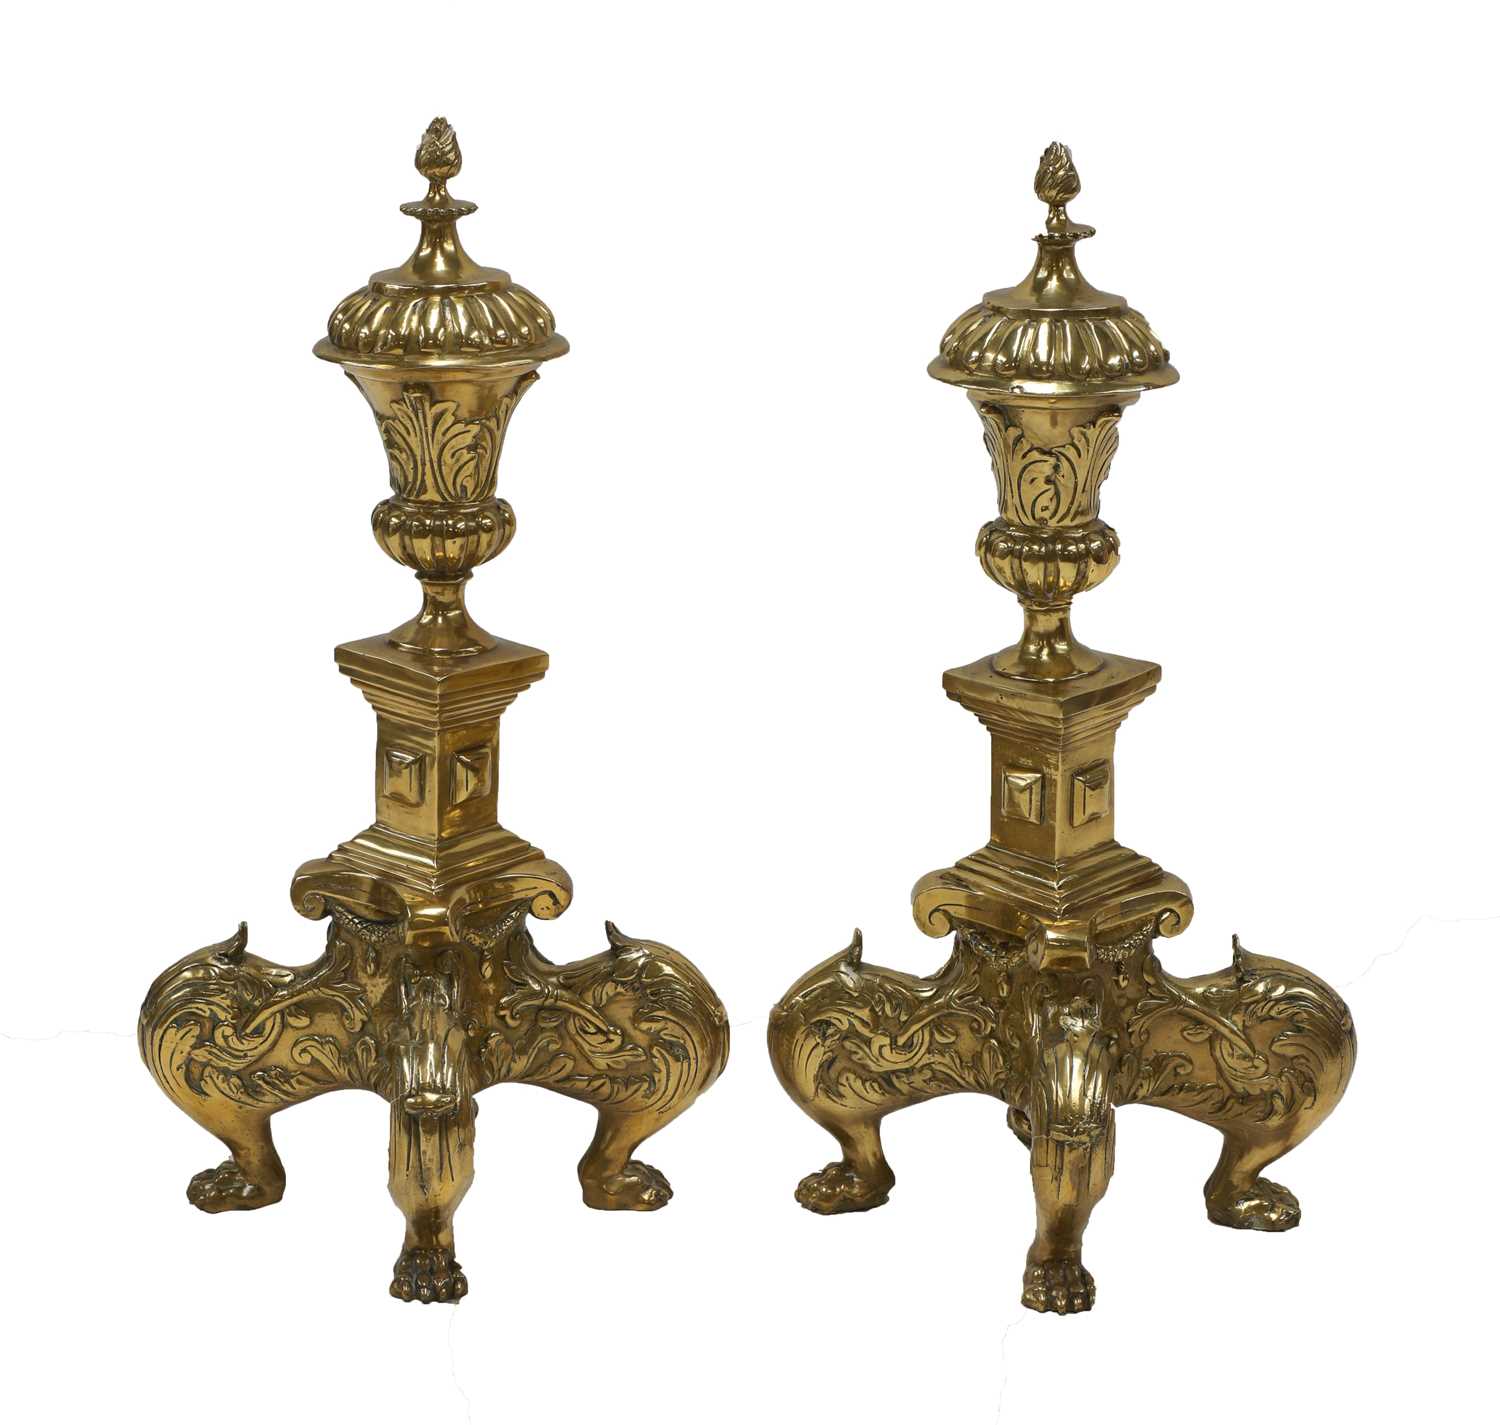 Lot 196 - A pair of large baroque-style cast bronze andirons